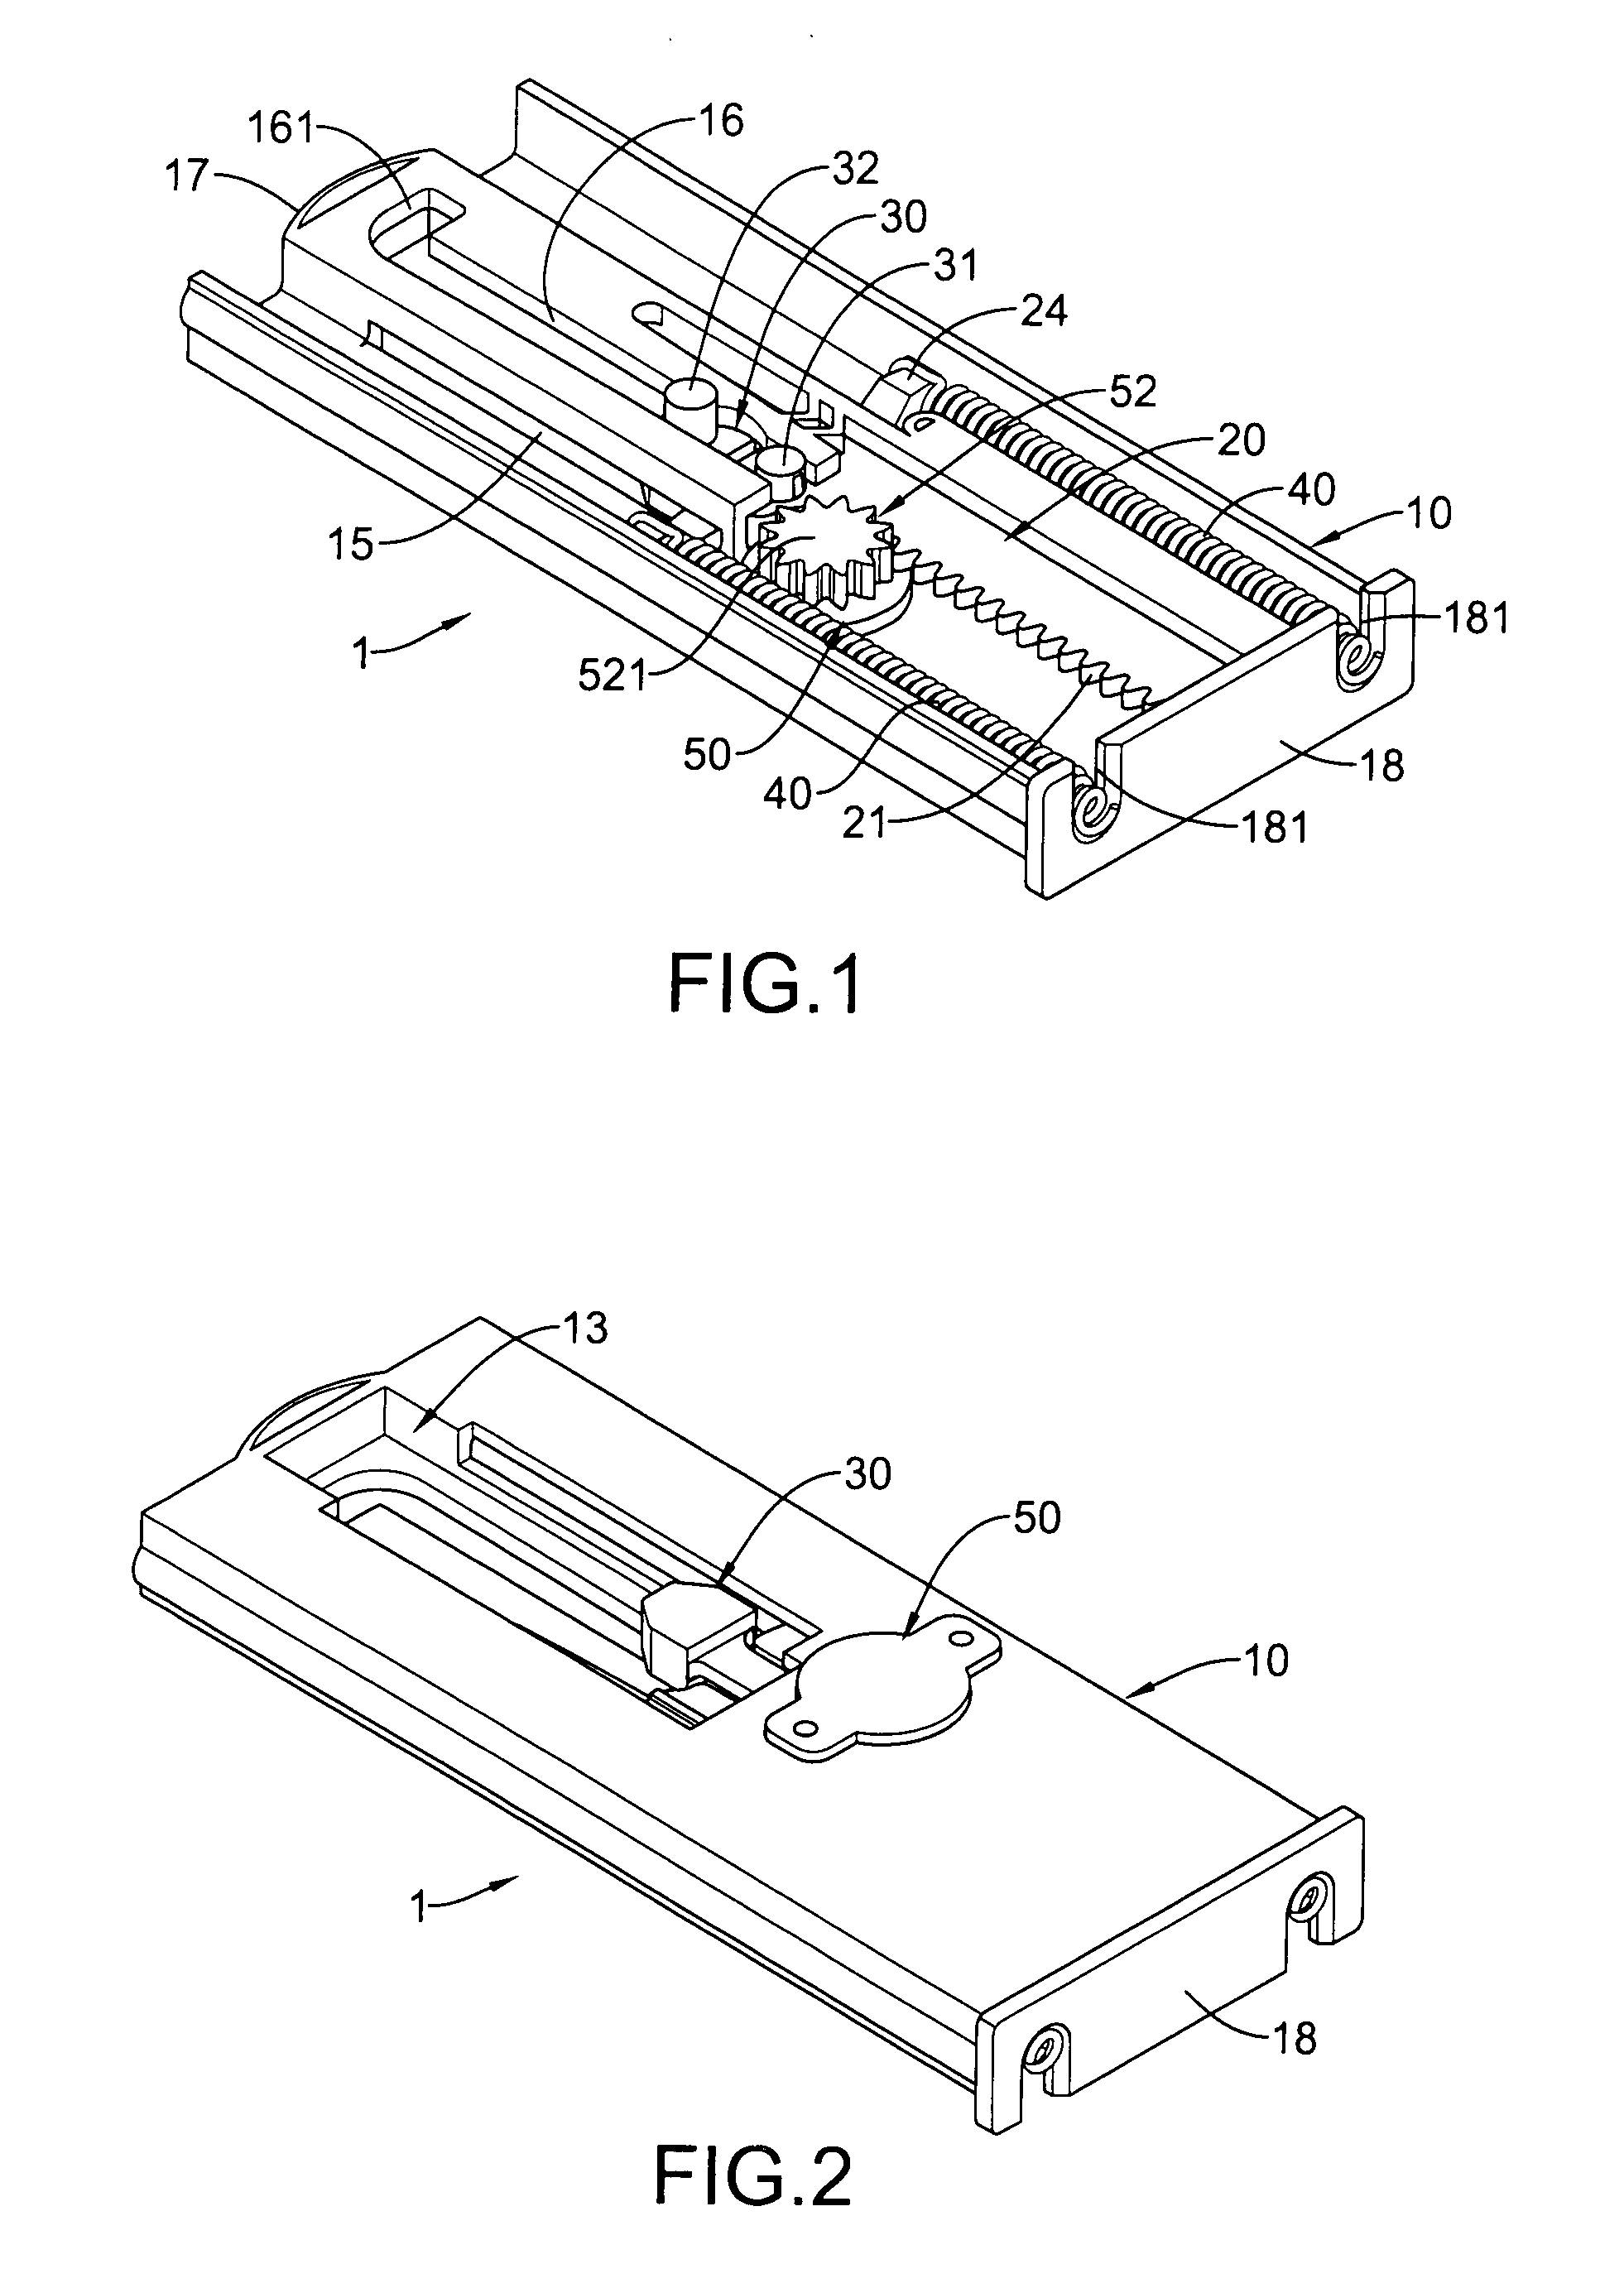 Auto-returning assembly with mechanical damper